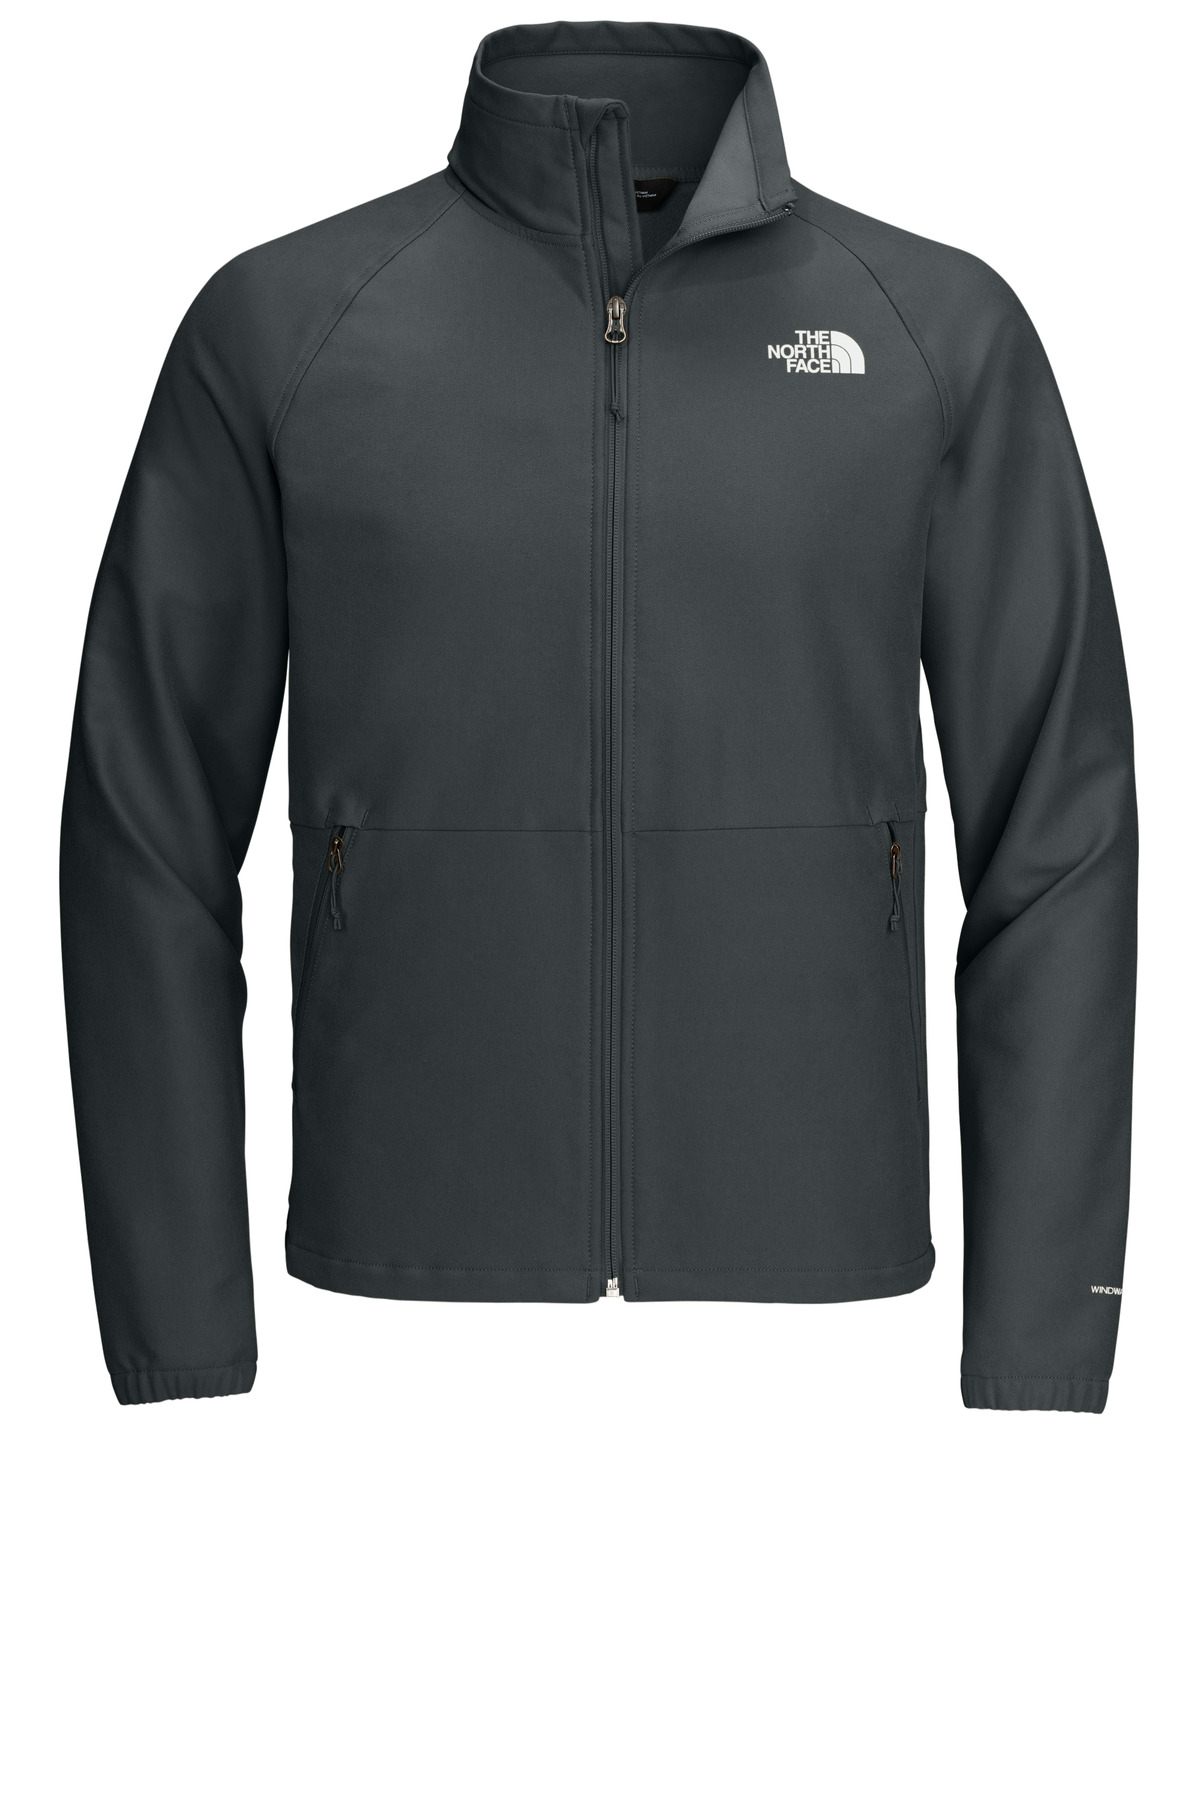 The North Face Barr Lake Soft Shell Jacket-